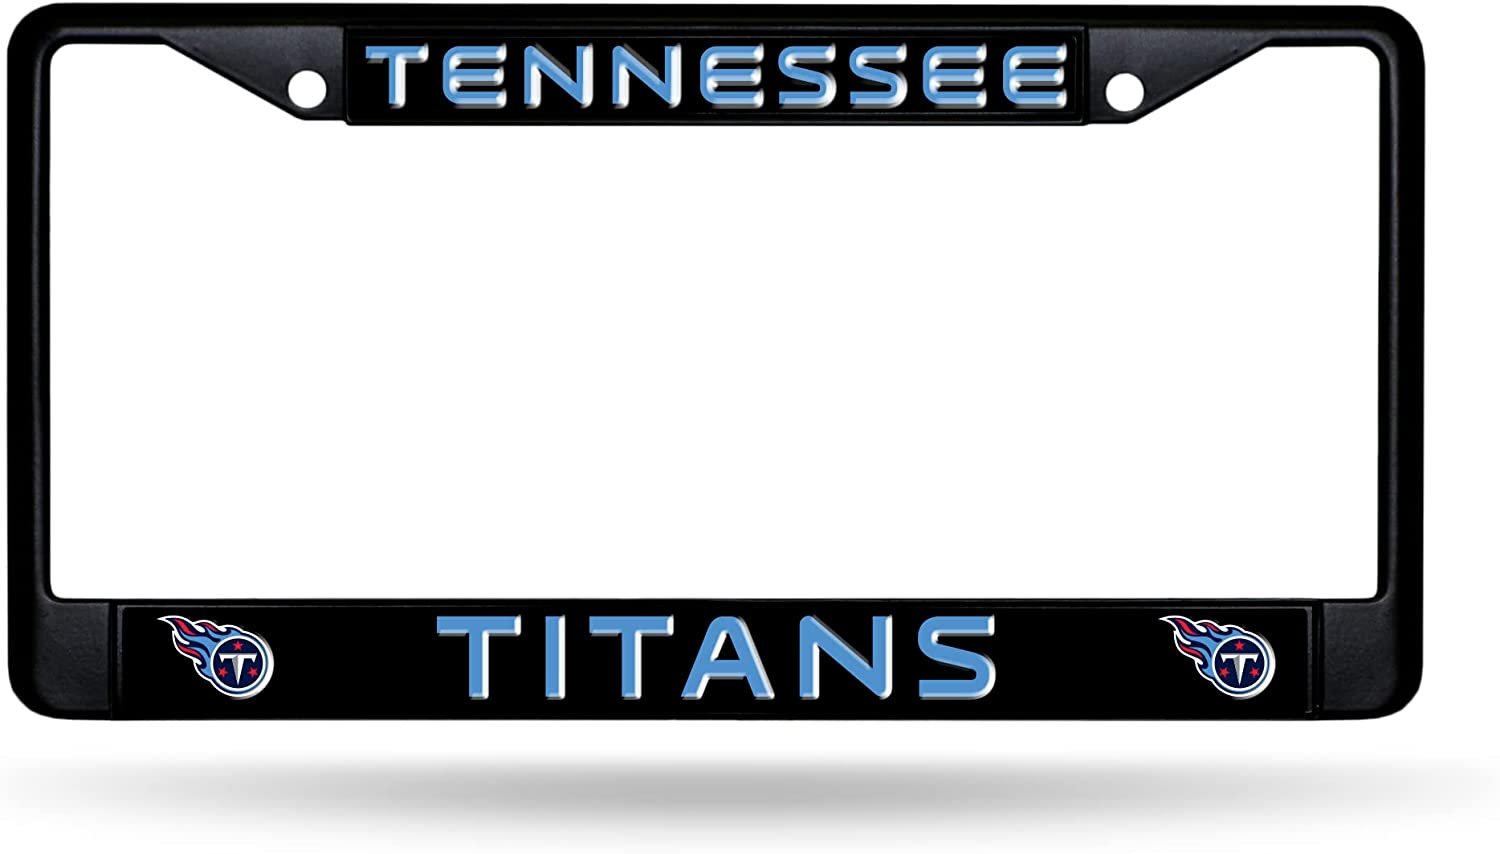 Tennessee Titans Black Metal License Plate Frame Chrome Tag Cover 6x12 Inch